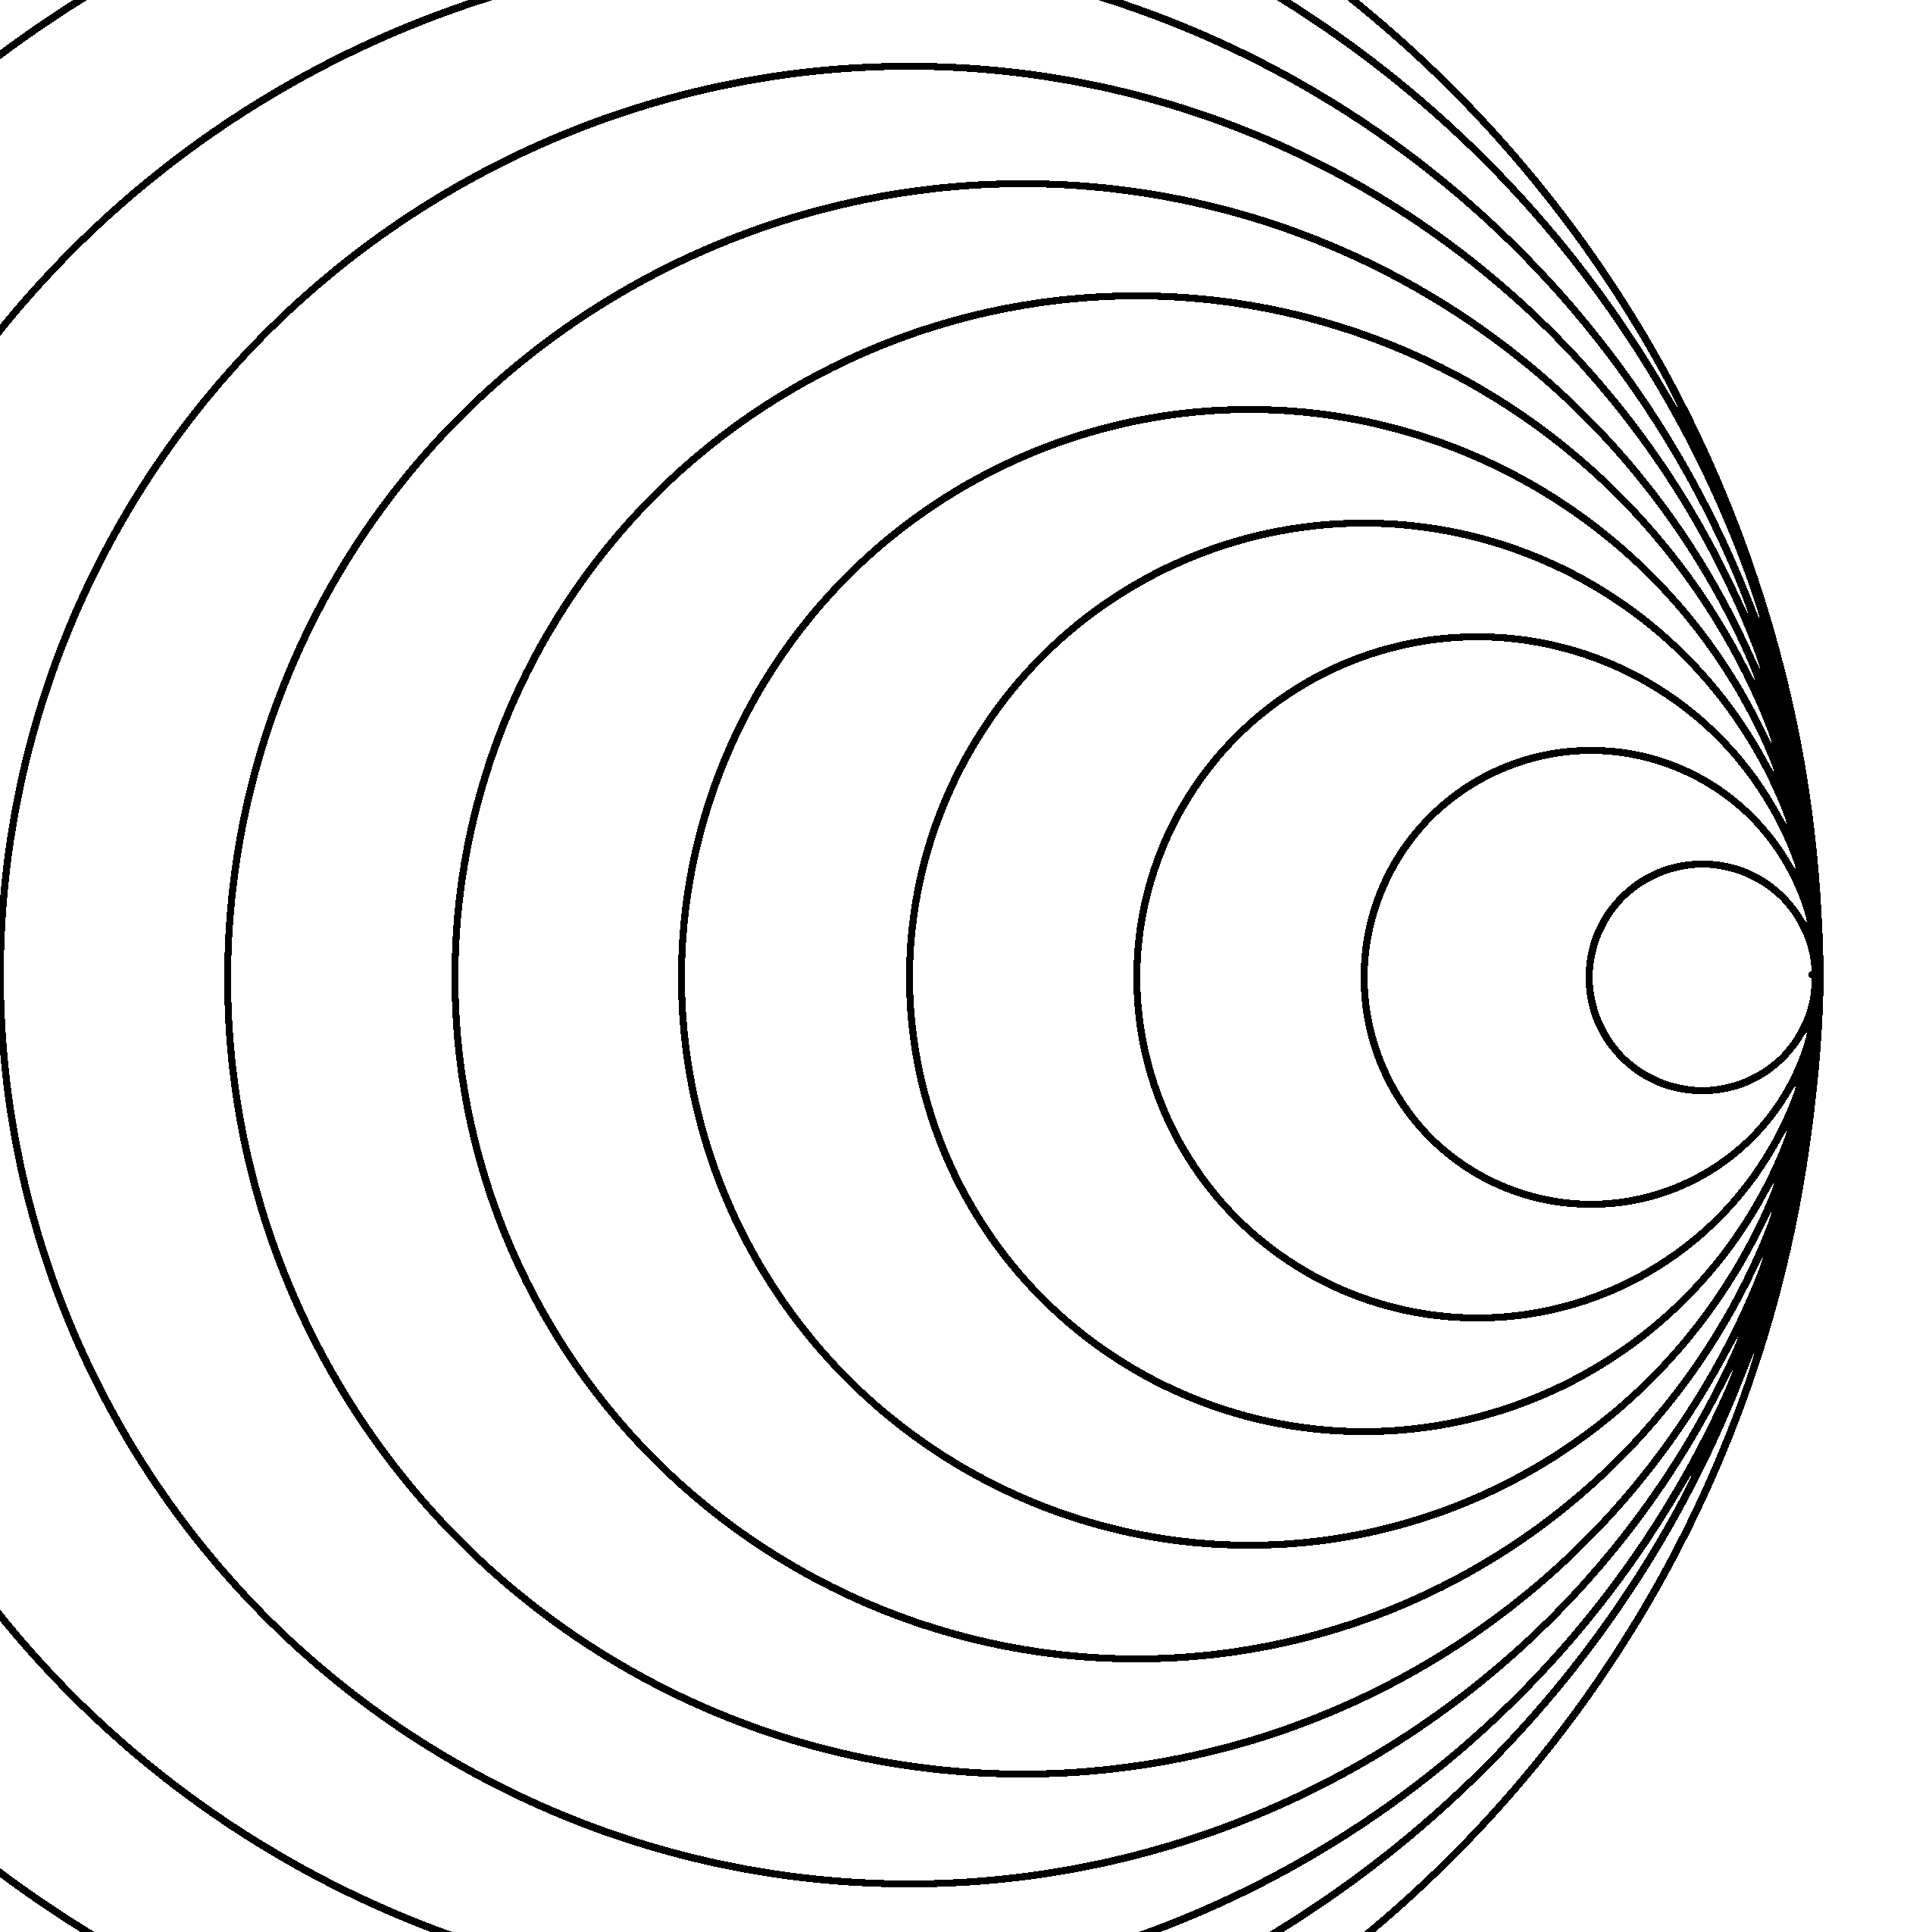 Line drawing at getdrawings. Clipart wave wave pattern wave